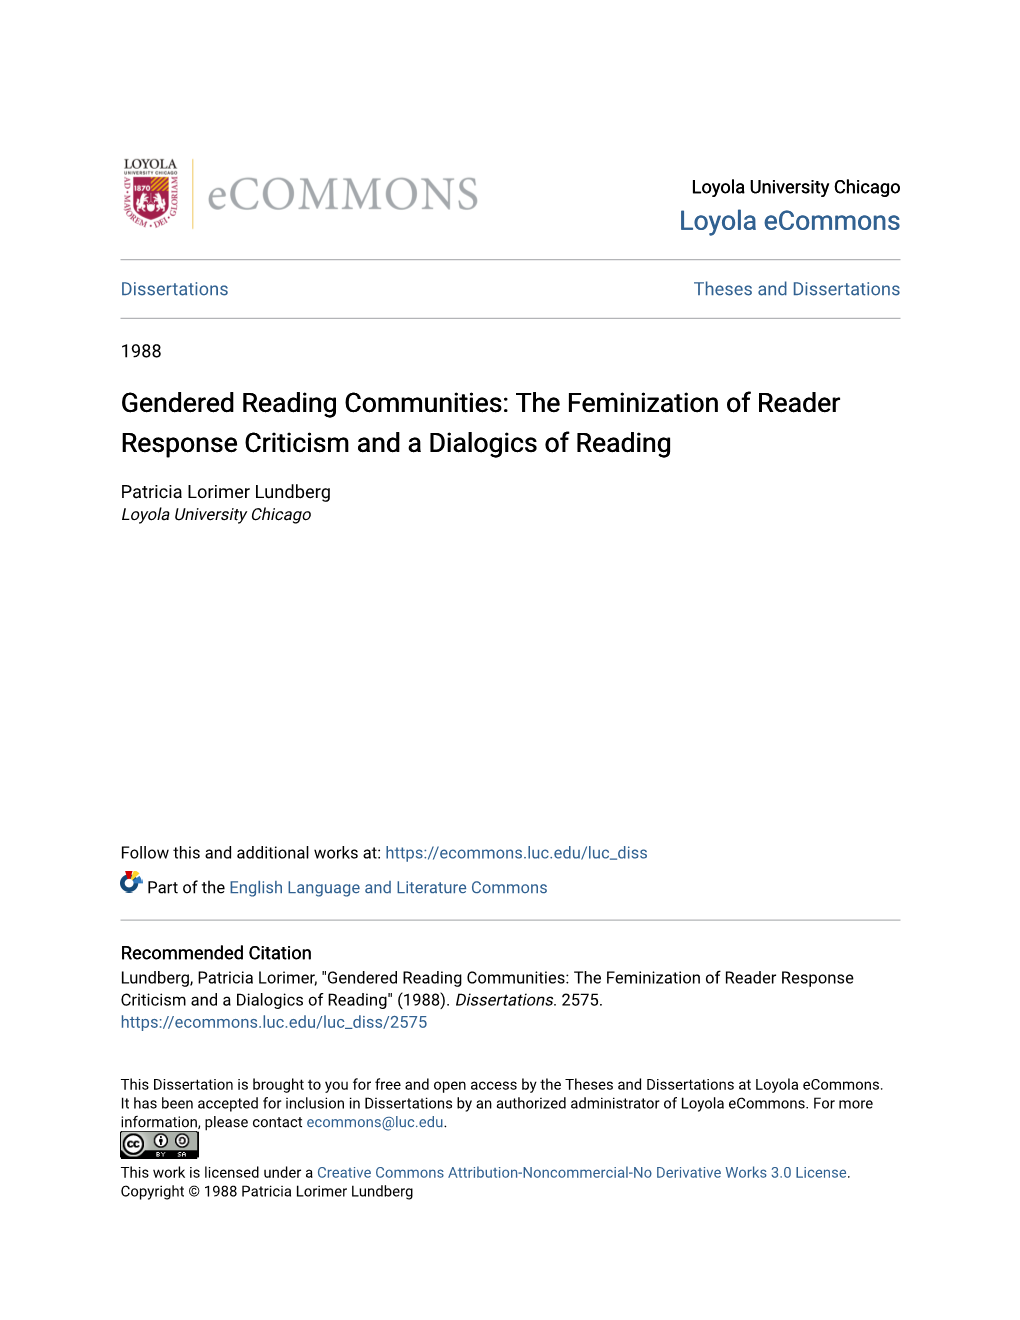 The Feminization of Reader Response Criticism and a Dialogics of Reading